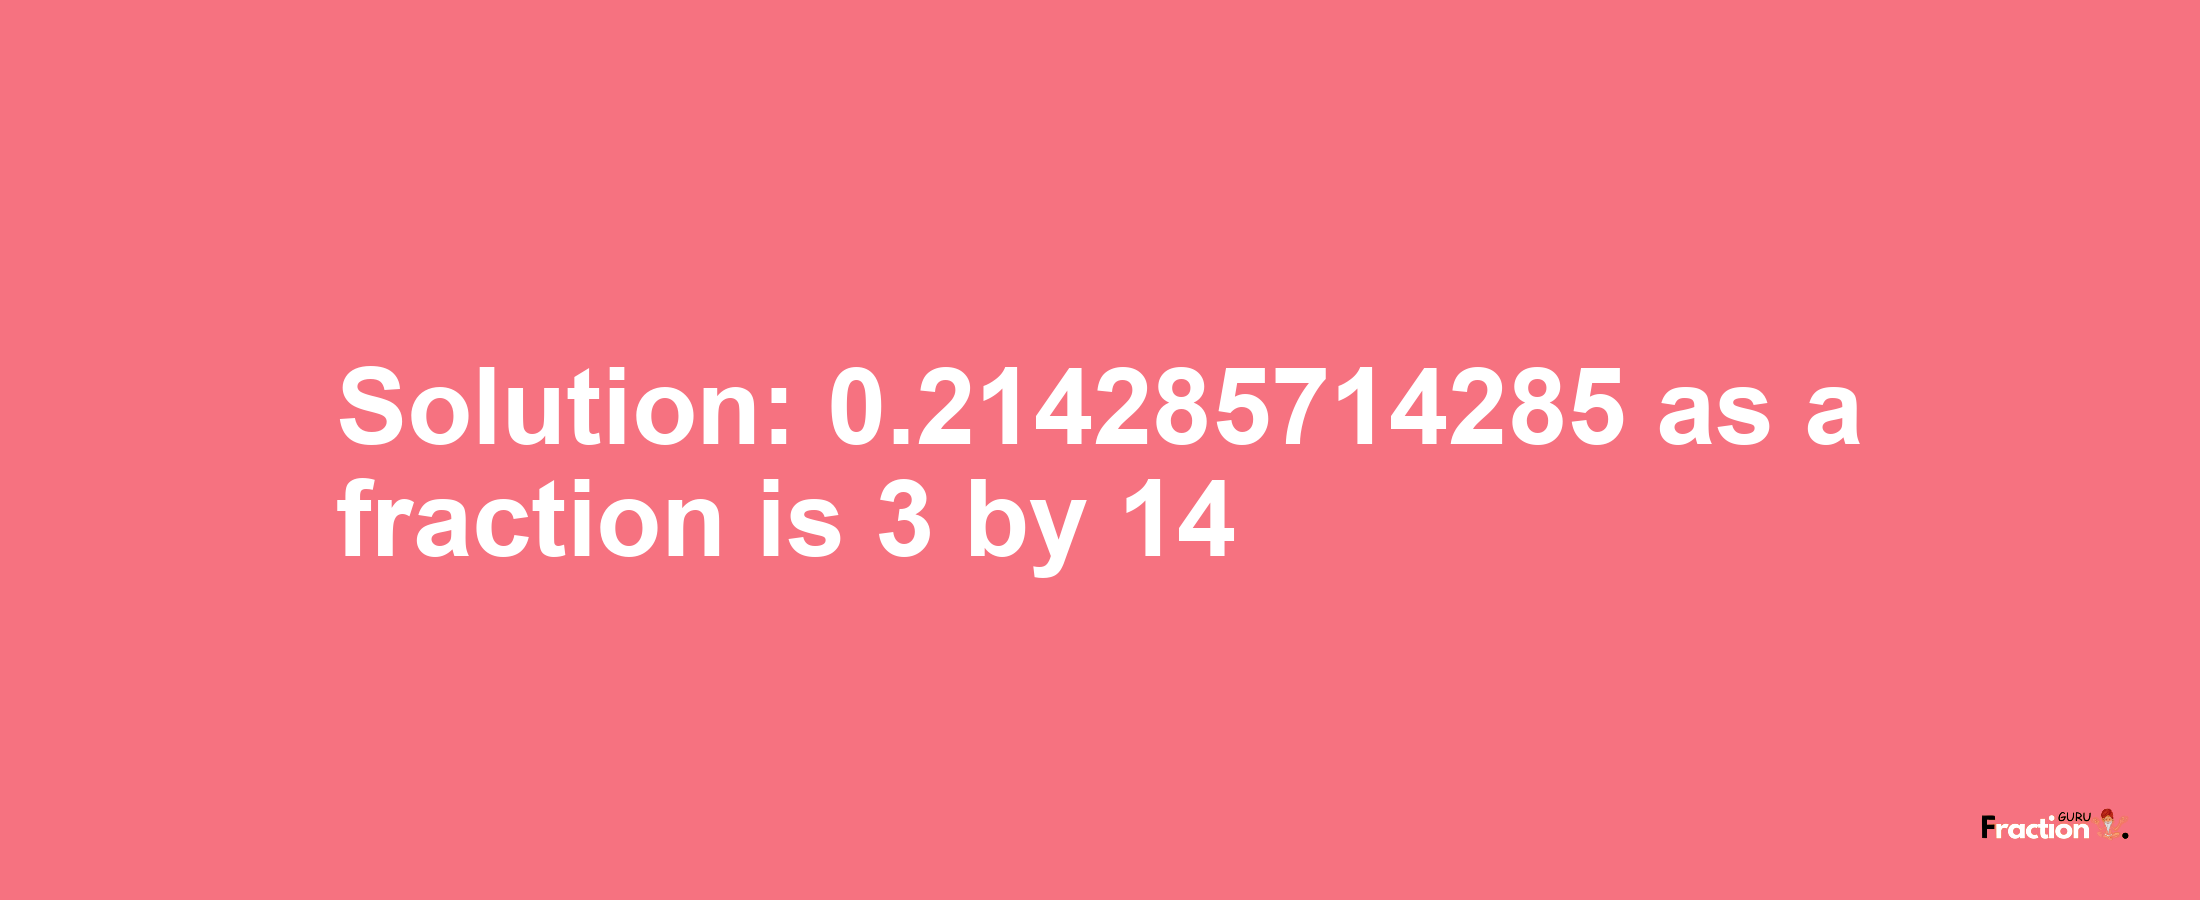 Solution:0.214285714285 as a fraction is 3/14